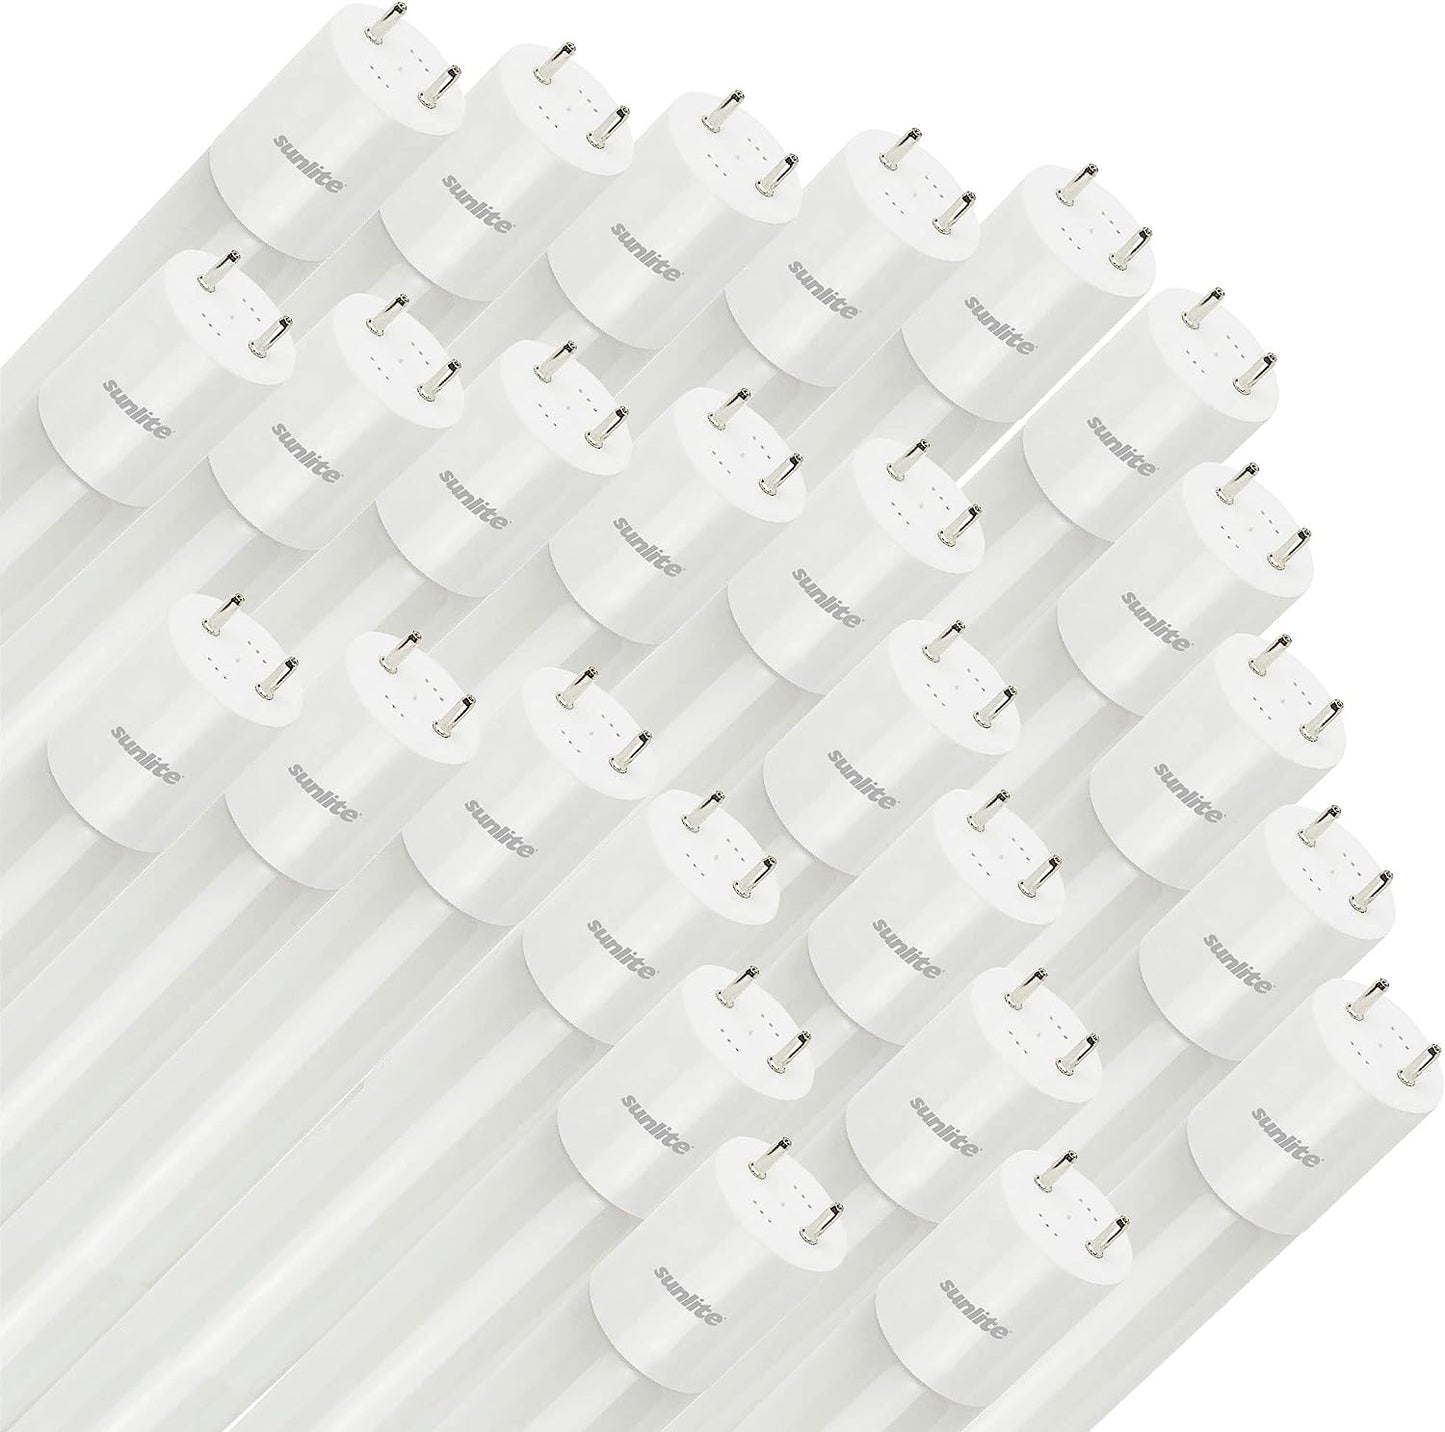 Sunlite 88424 LED T8 Ballast Bypass Light Tube (Type B) 4 Foot, 17W (F32T8 Equal), 2100 Lm, Medium G13 Base, Frosted, Dual End Connection, UL Listed, 3000K Warm White, 25 Count